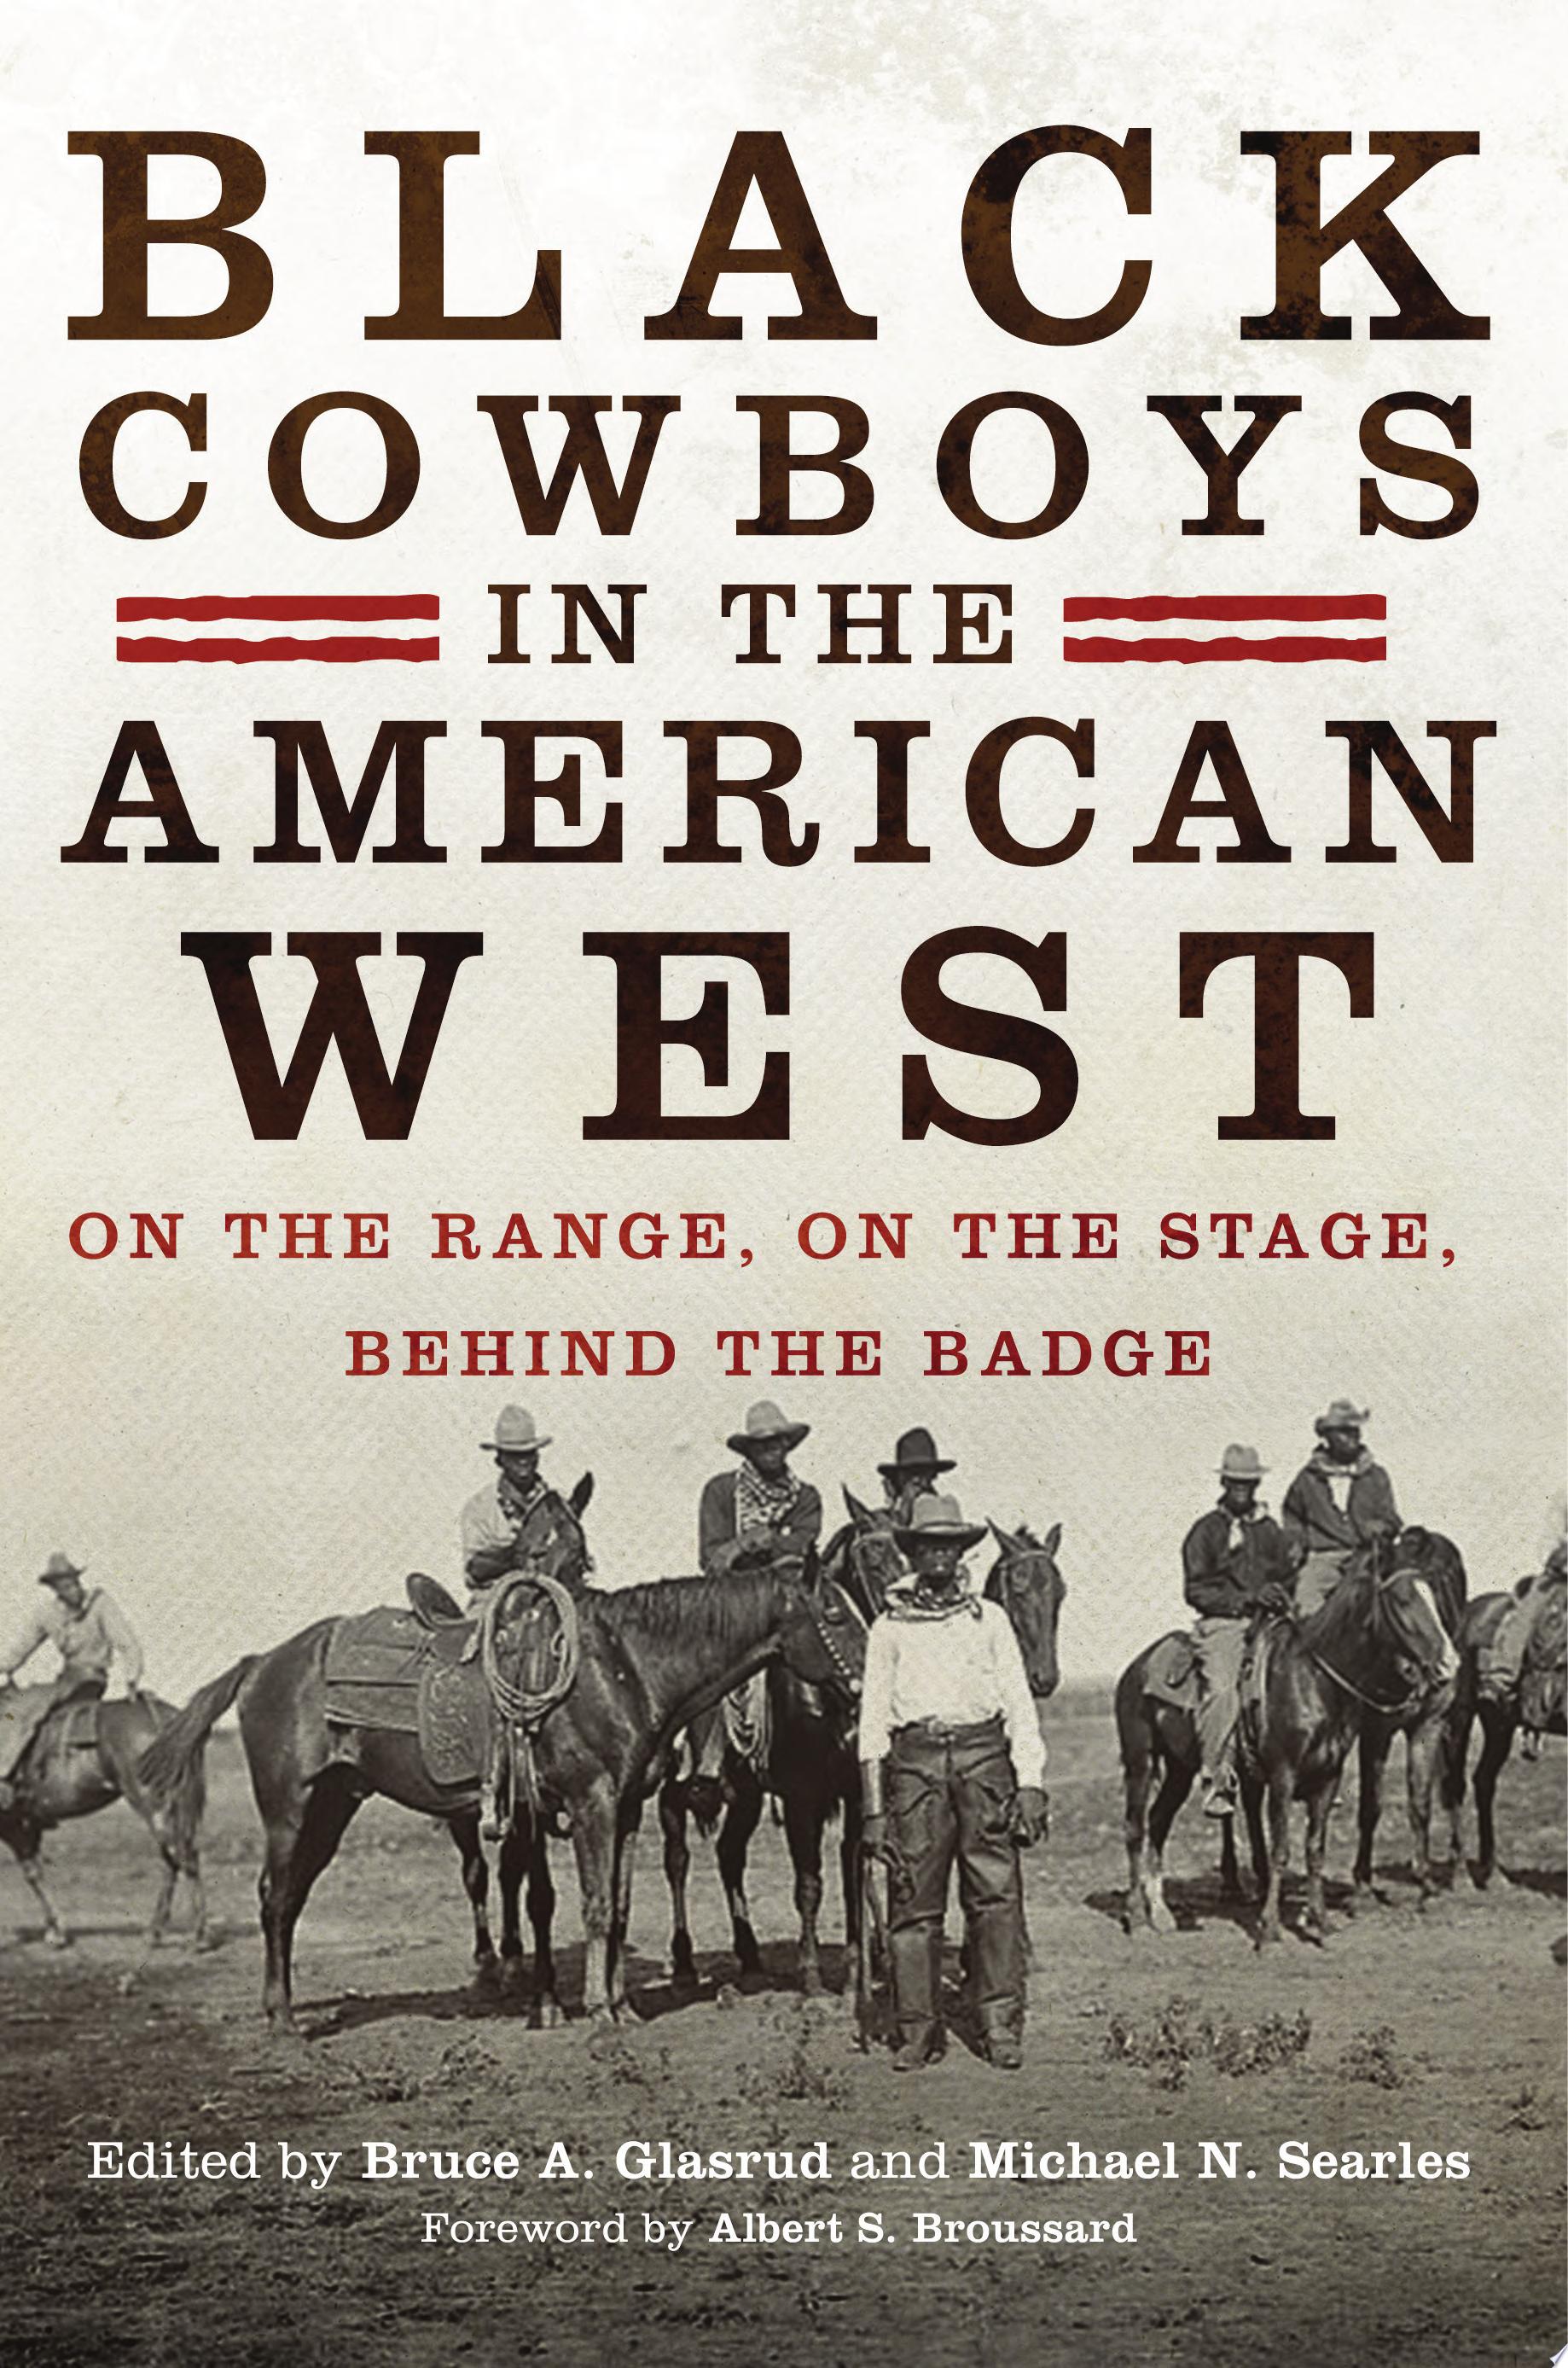 Image for "Black Cowboys in the American West"